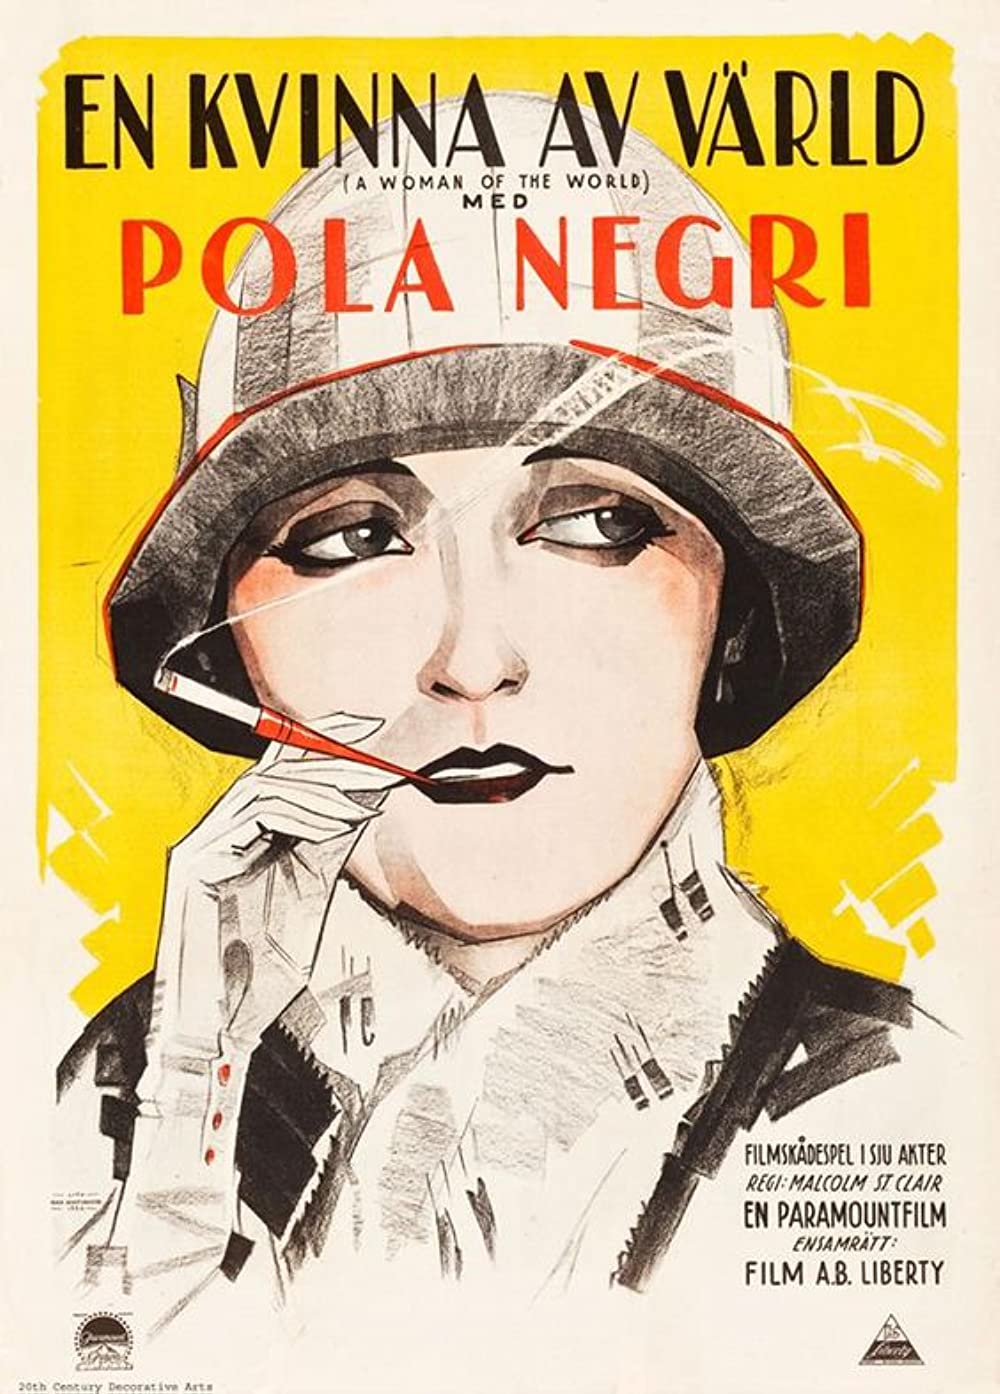 Film poster for A WOMAN OF THE WORLD (1925)